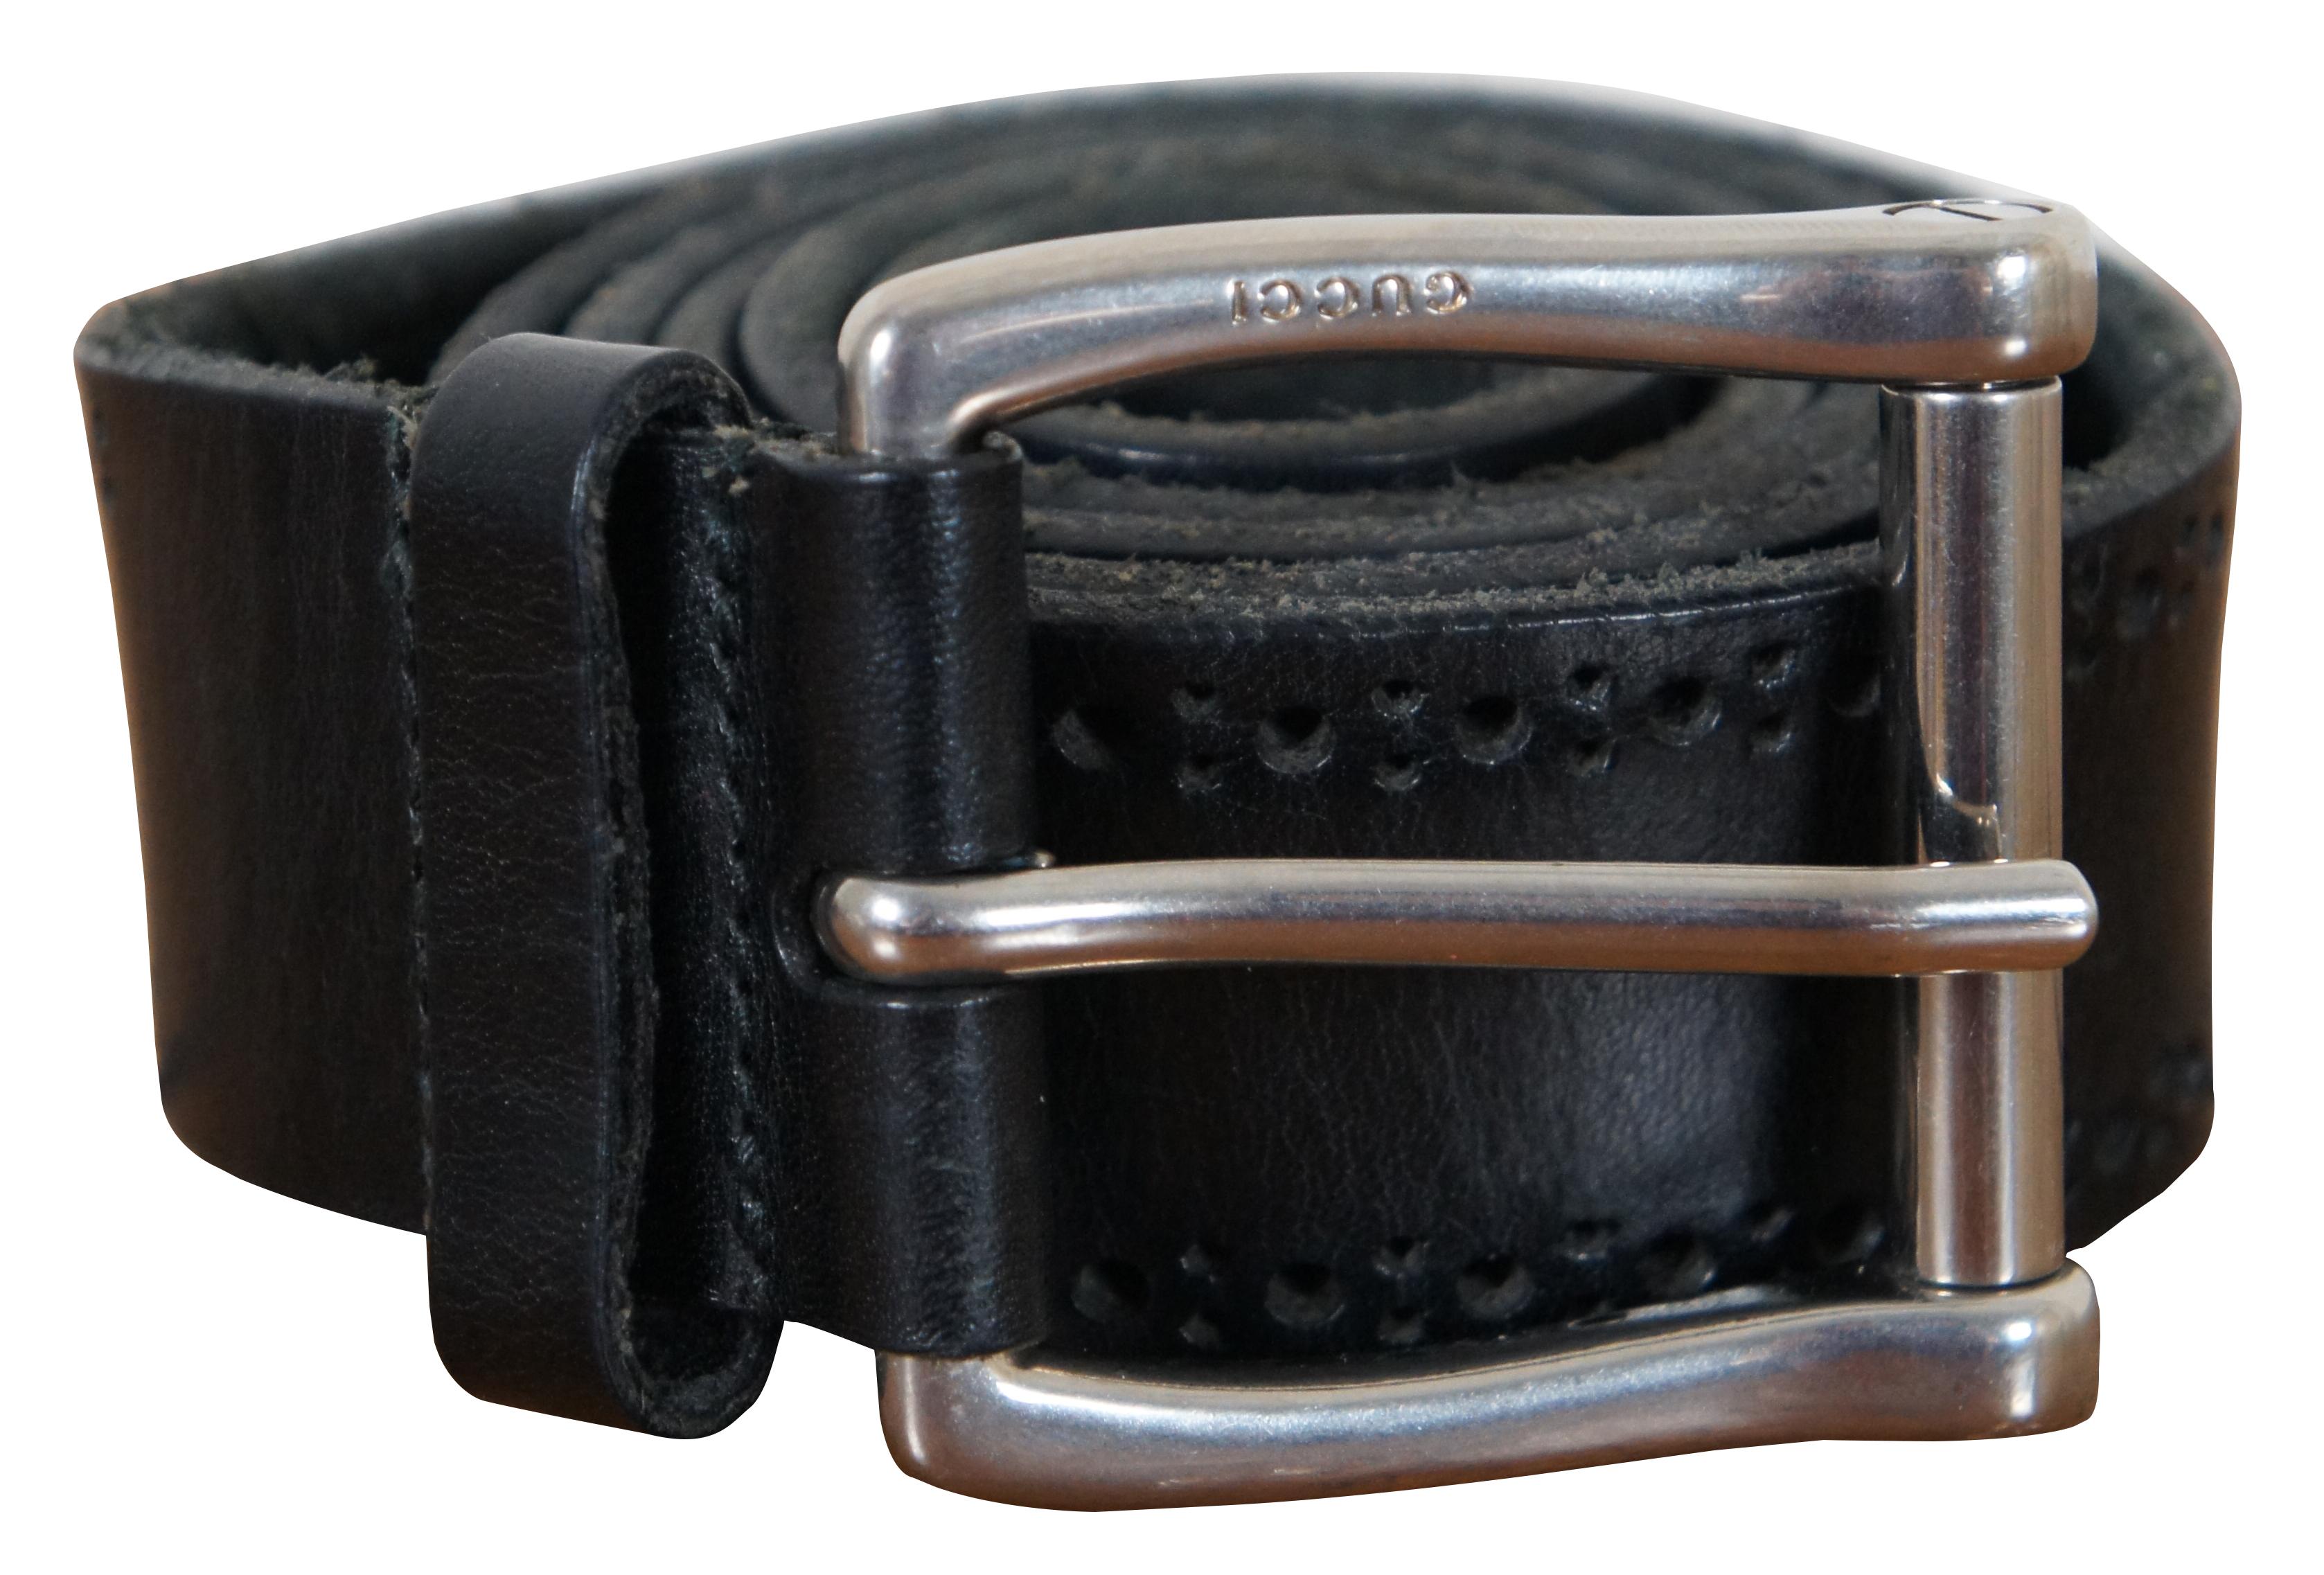 Gucci black leather mens belt featuring a pierced design along the edge and squared off silver tone buckle; serial number 302972214351100.

Size 40 / Total Length – 46.75” x 1.5” / Buckle - 2.125” x 2.25” / Fits Waists - 37